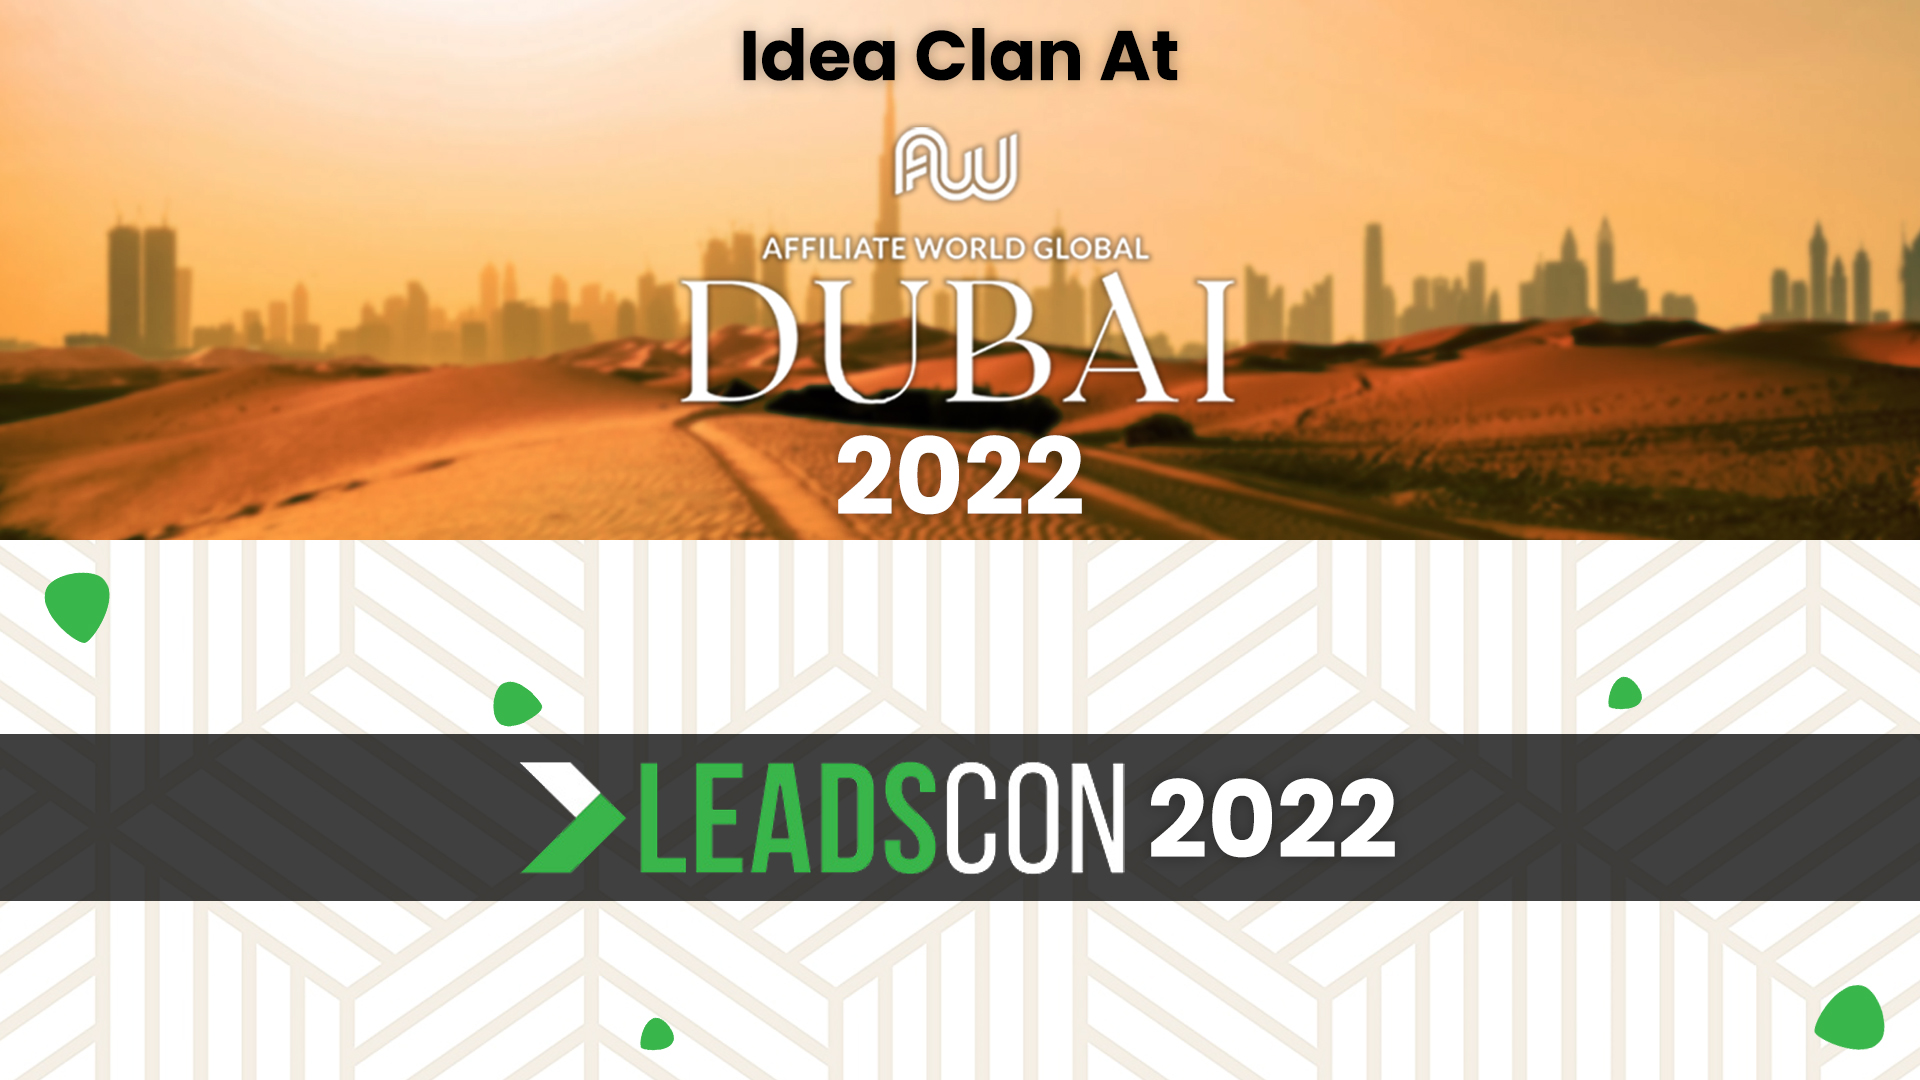 From Dubai to Las Vegas, Idea Clan Leaves Its Footsteps Everywhere in the Marketing World